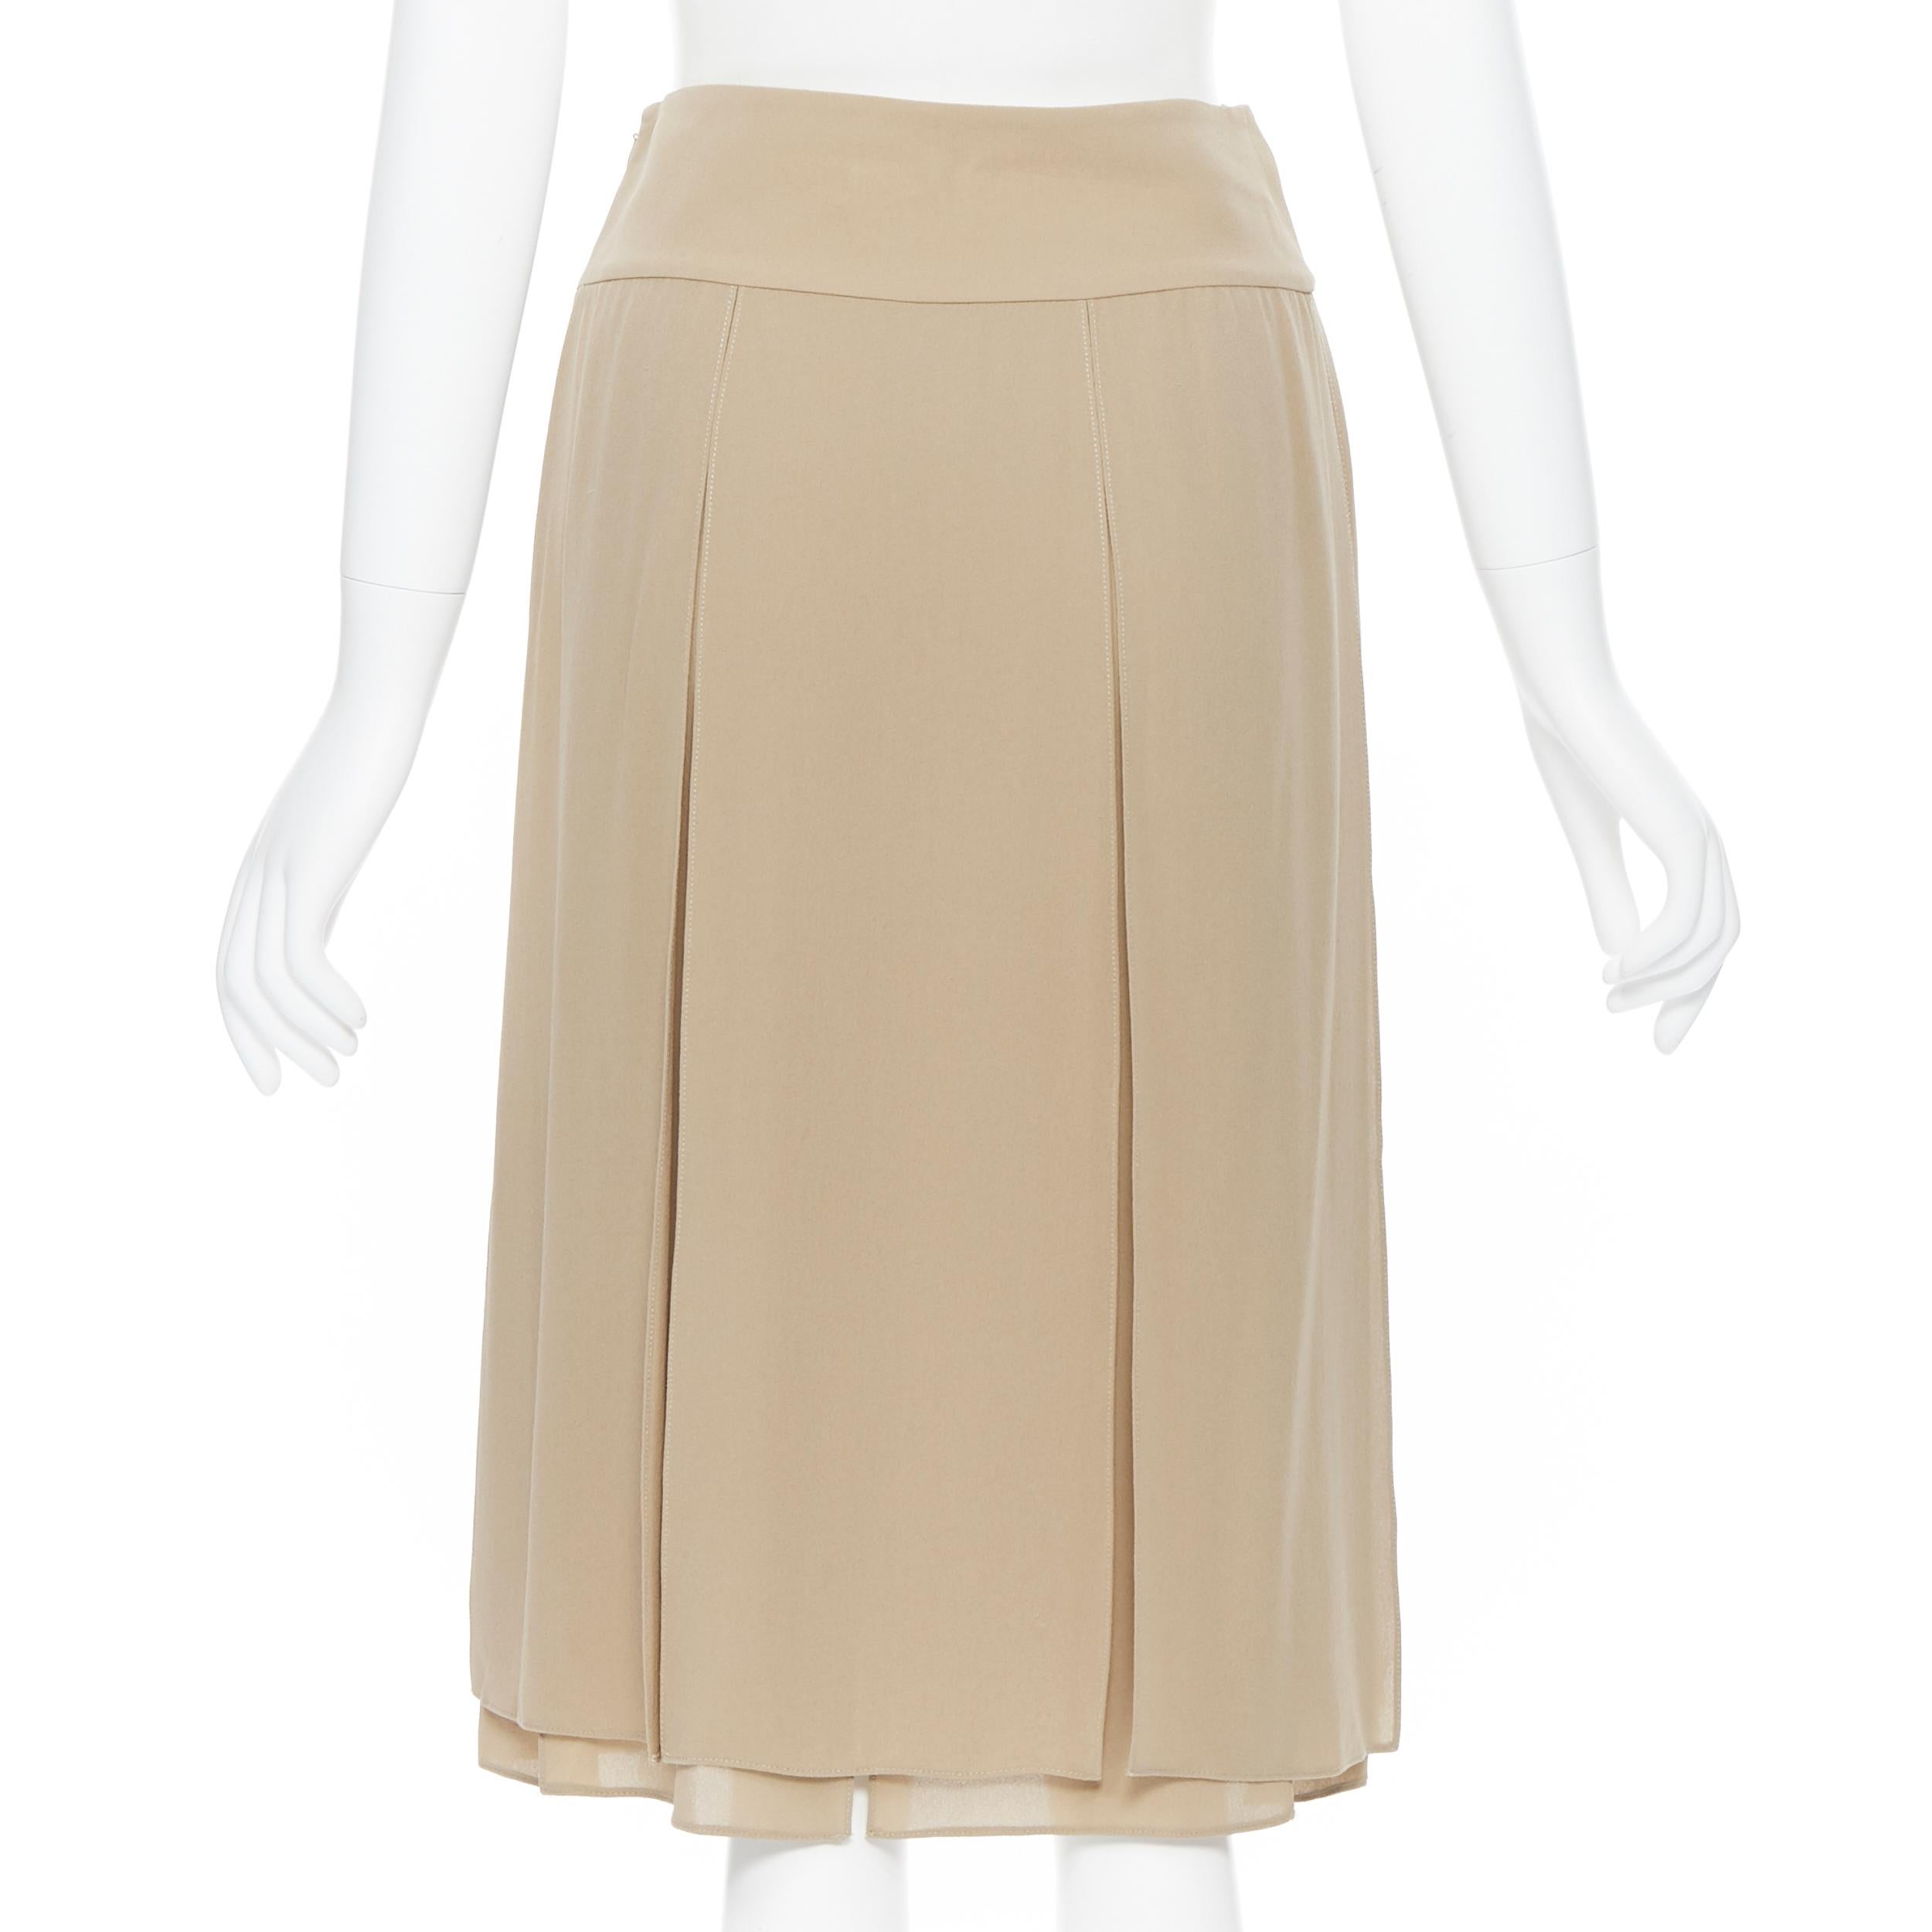 Beige MICHAEL KORS COLLECTION 100% silk camel beige pleated layered skirt US0 24